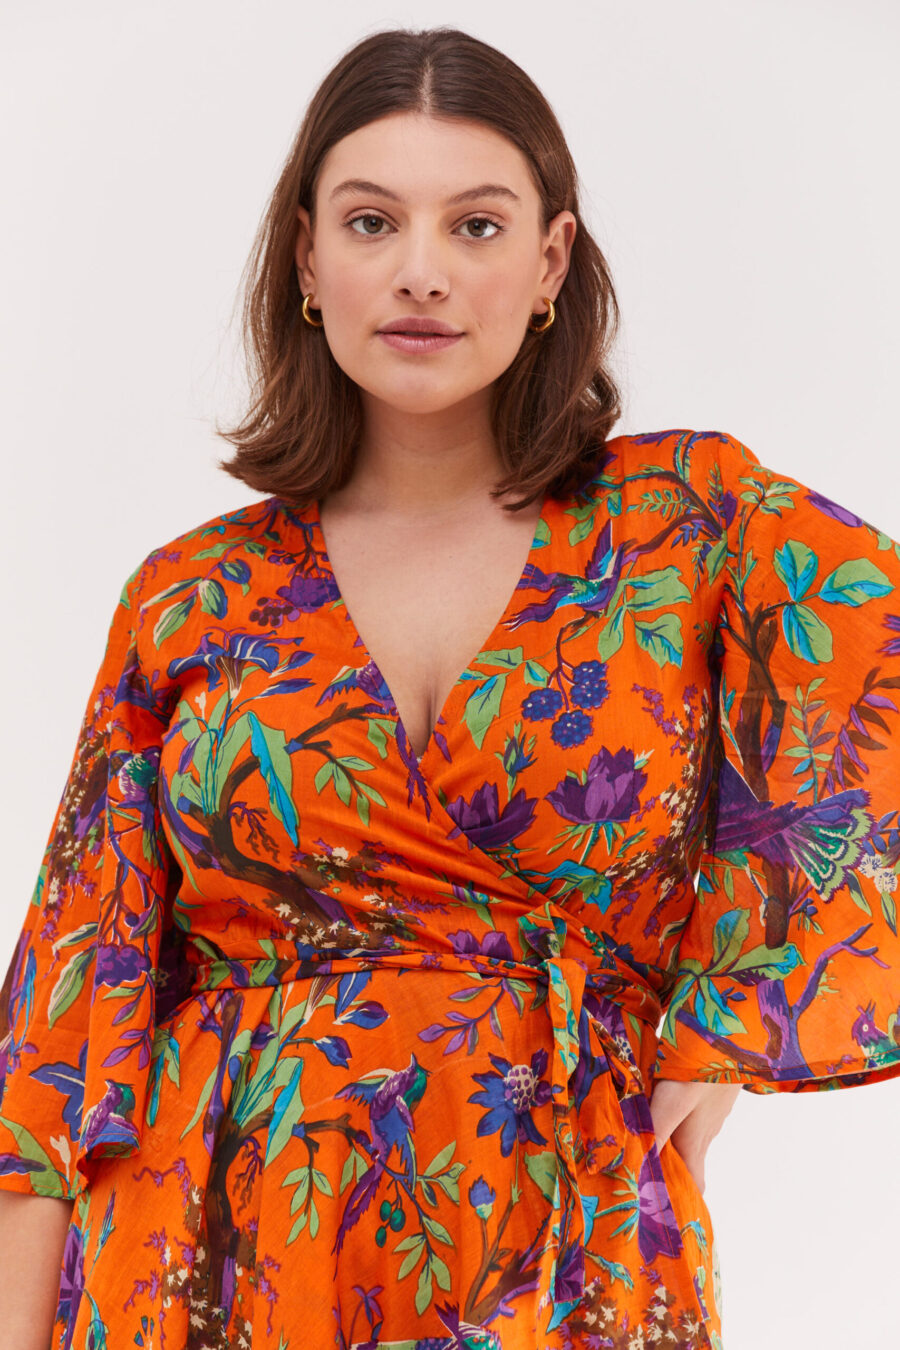 Gali dress | Wrap dress, Classic and festive dress – Orange tropicana, colorful tropical print on an orange backgroung by comfort zone boutique